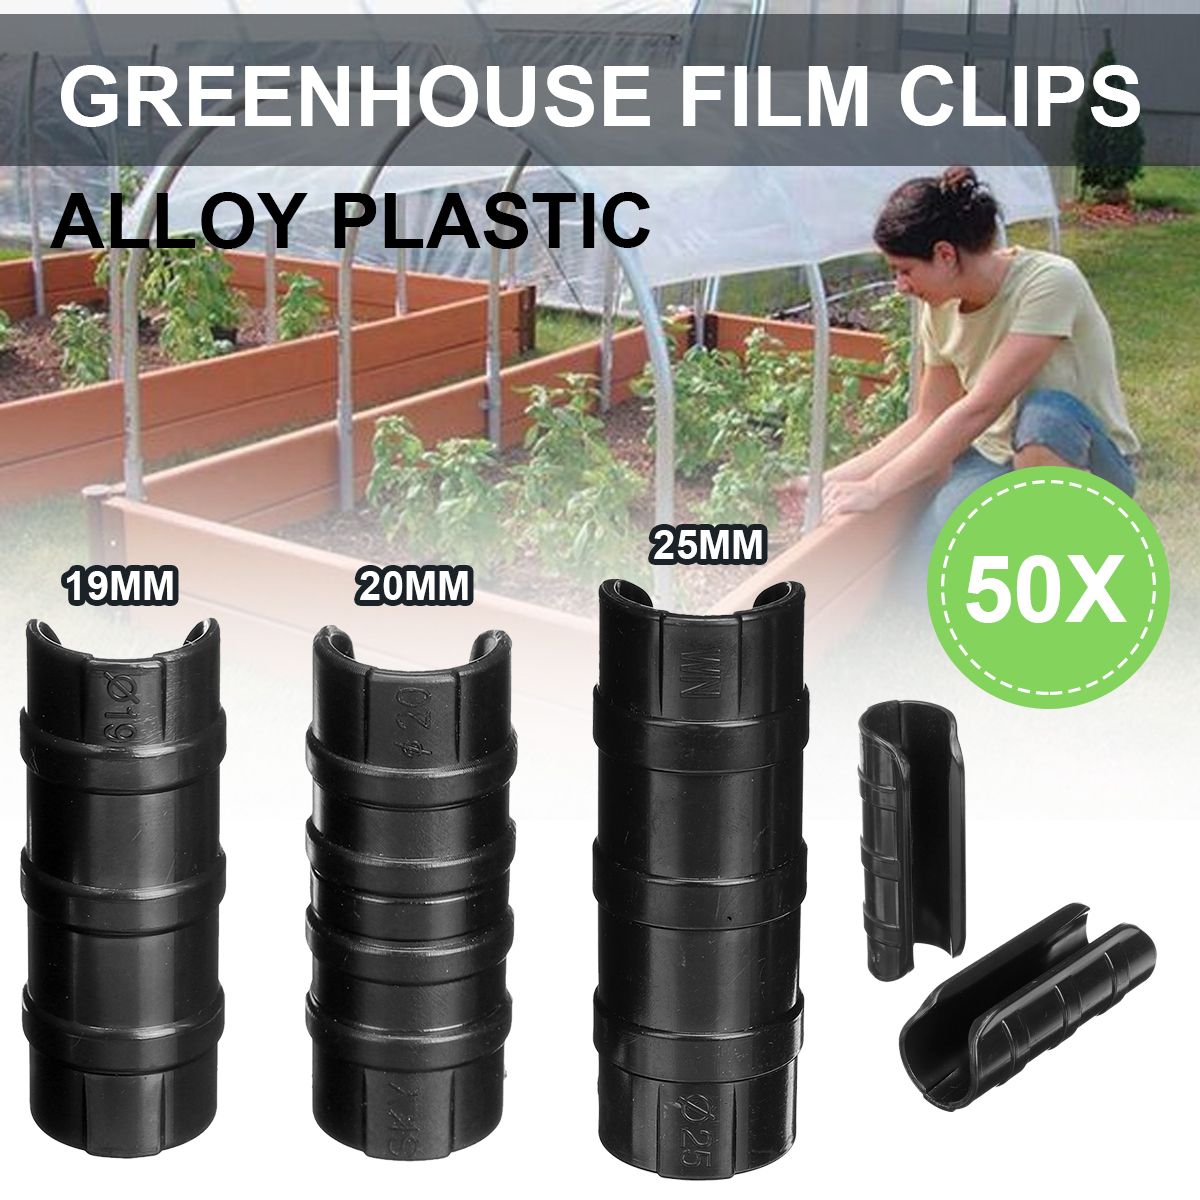 50pcs-192025MM-Garden-Buildings-Tube-Clip-Greenhouse-Frame-Pipe-Tube-Film-Clip-Clamp-Connector-Kit-A-1705114